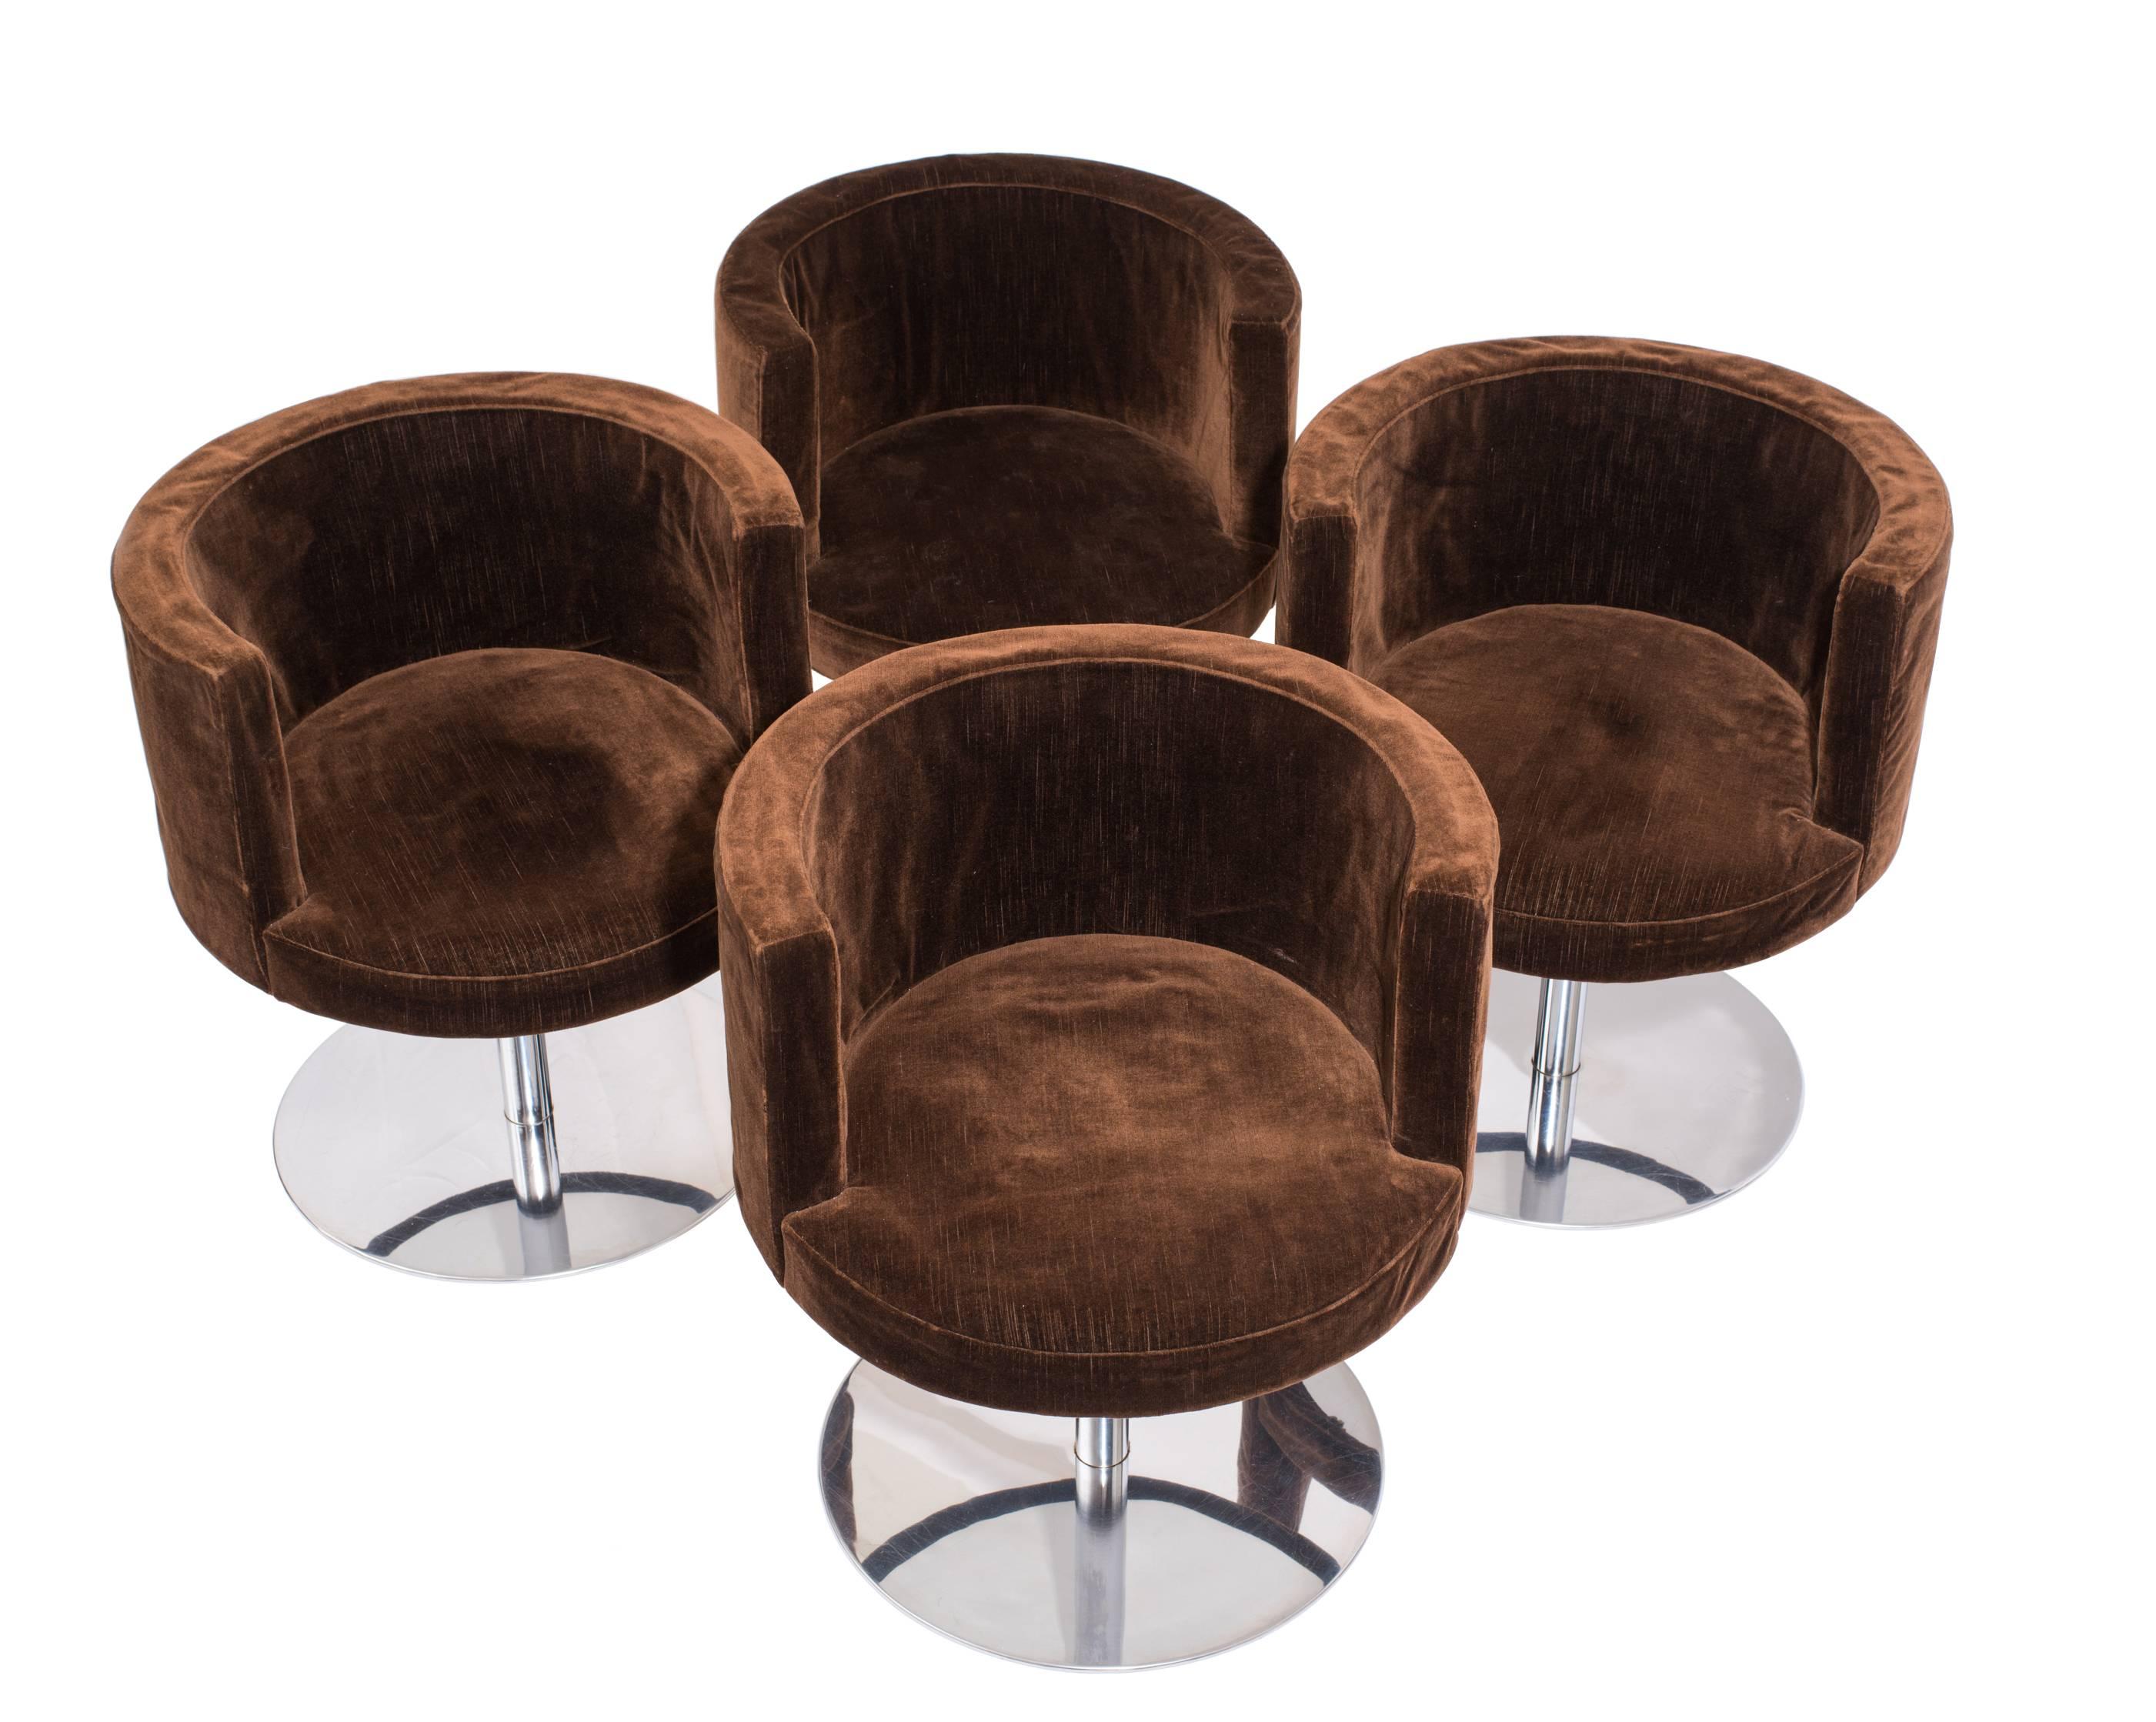 A pair of Harvey Probber swivel chairs, model #3451, with a wonderfully spare form and sleek, stainless steel bases that swivel a smooth 360 degrees. Known as the 'Fraschini' chair and each stamped 'Made in Italy' to the underside, these were